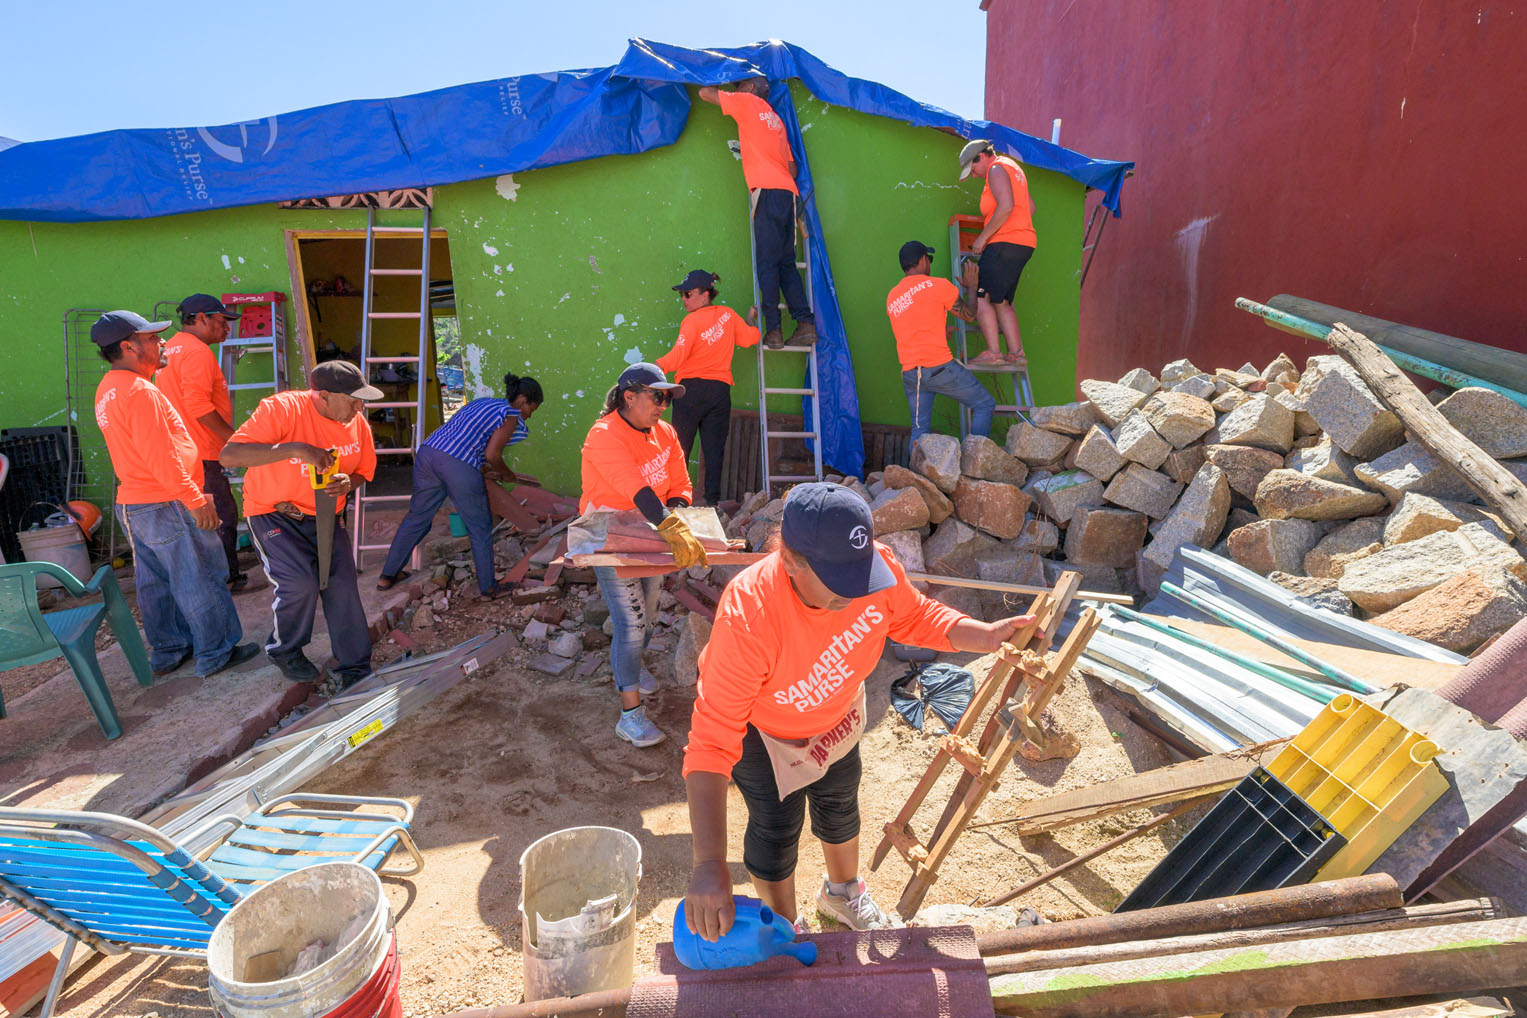  Our staff, along with Disaster Relief volunteers from Mexico City churches, joined relief efforts. 